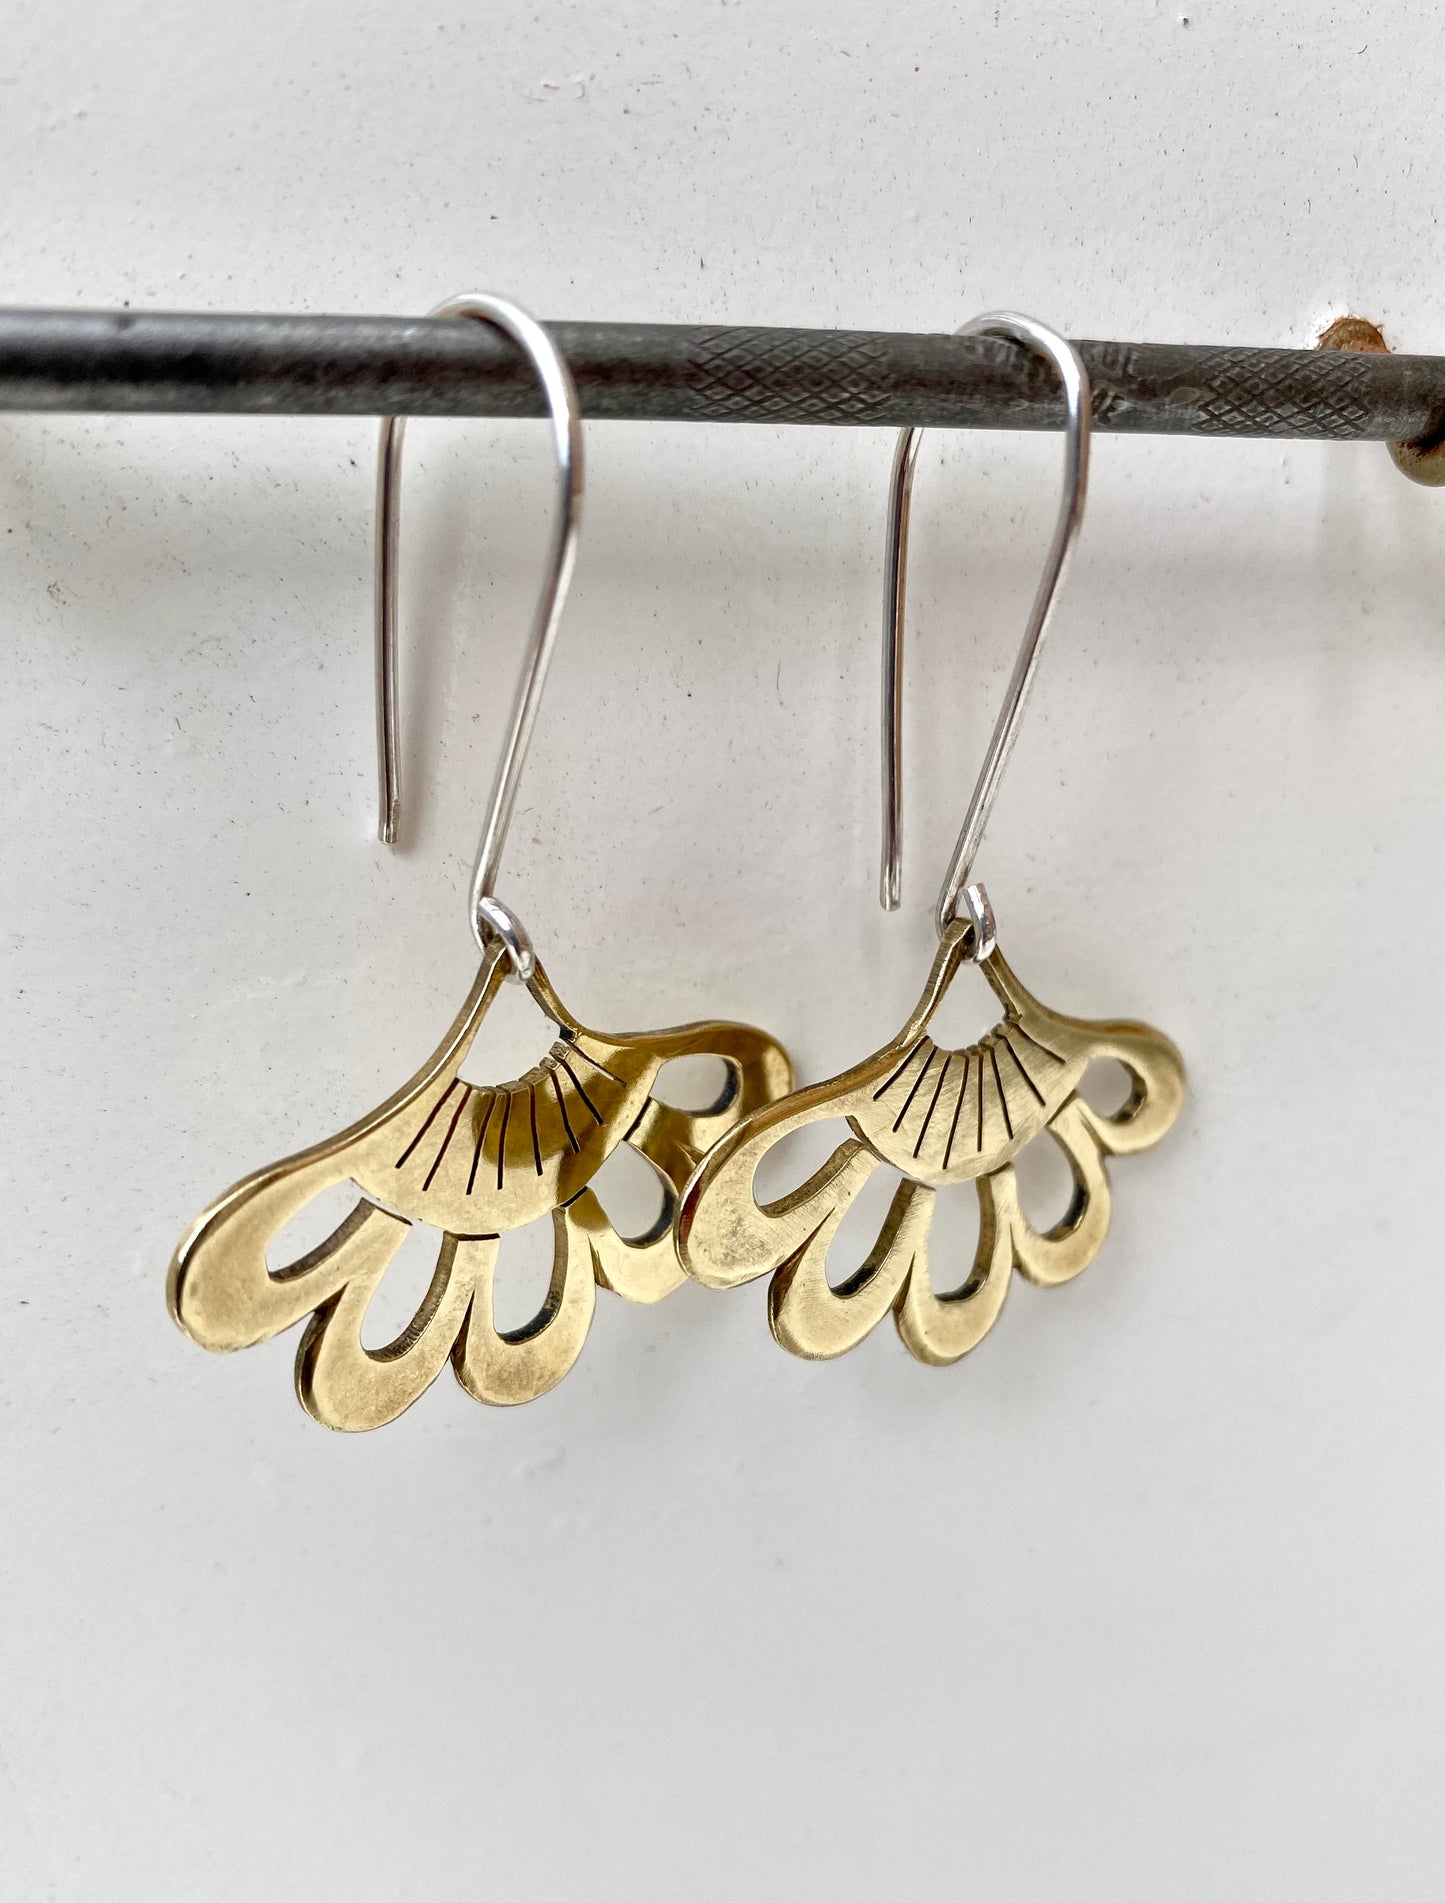 Elegant lotus hook earrings in silver, pictured from a side angle to highlight the curvature and craftsmanship.